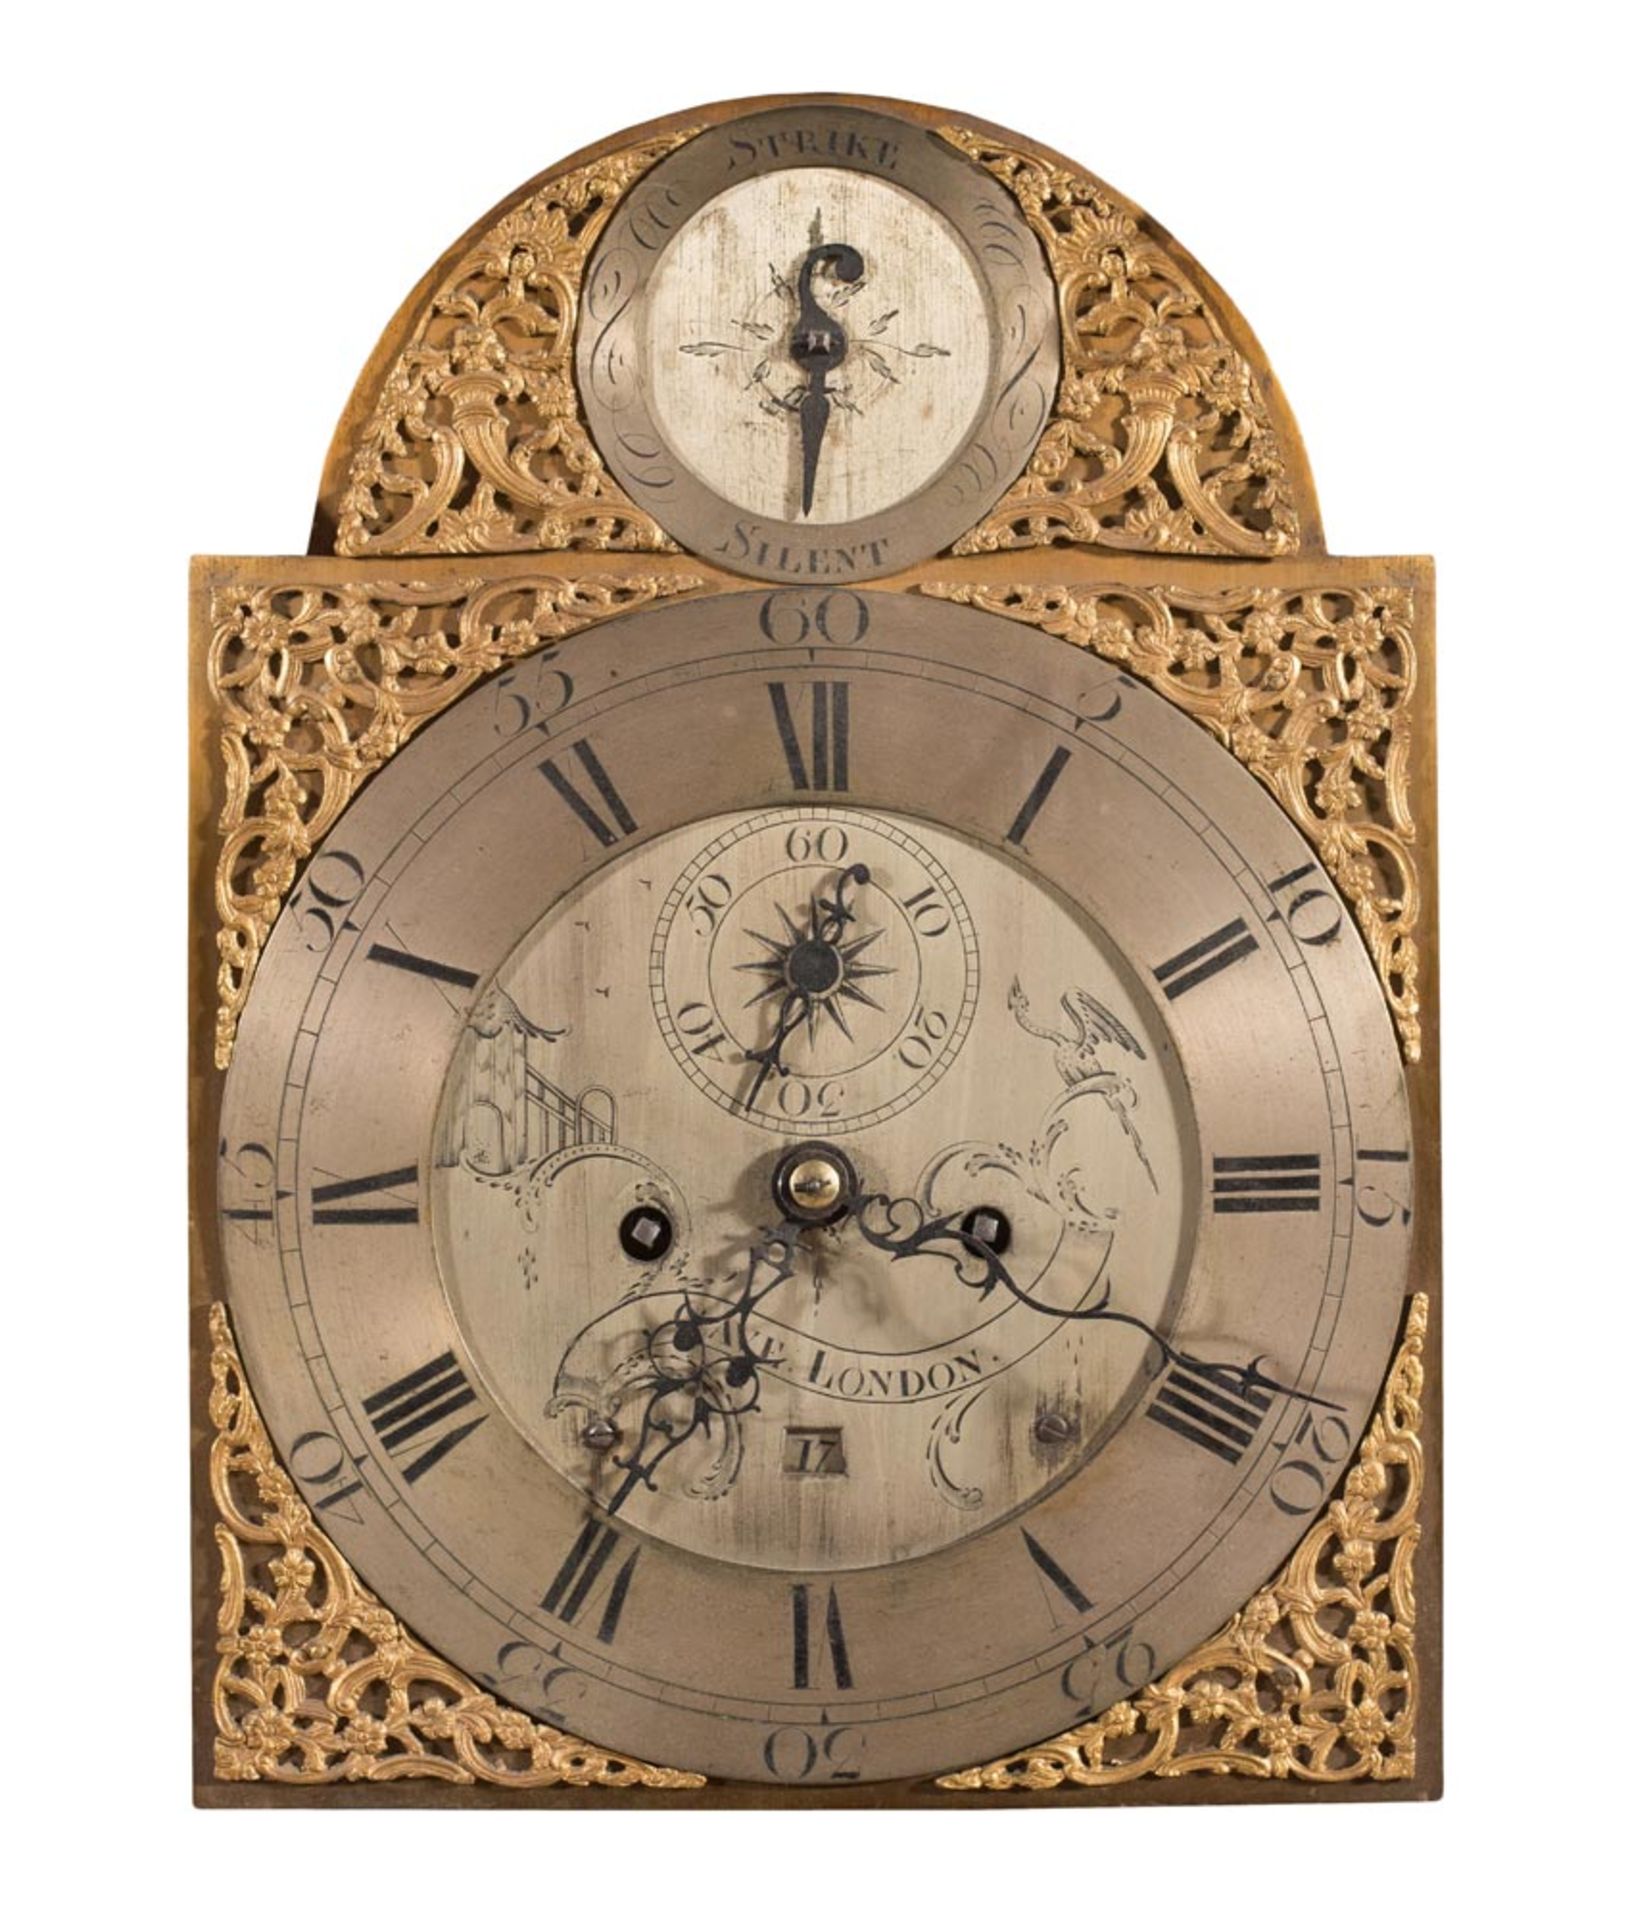 English Red Lacquer Longcase Clock with Chinoiserie Design, 18th Century. - Image 2 of 2